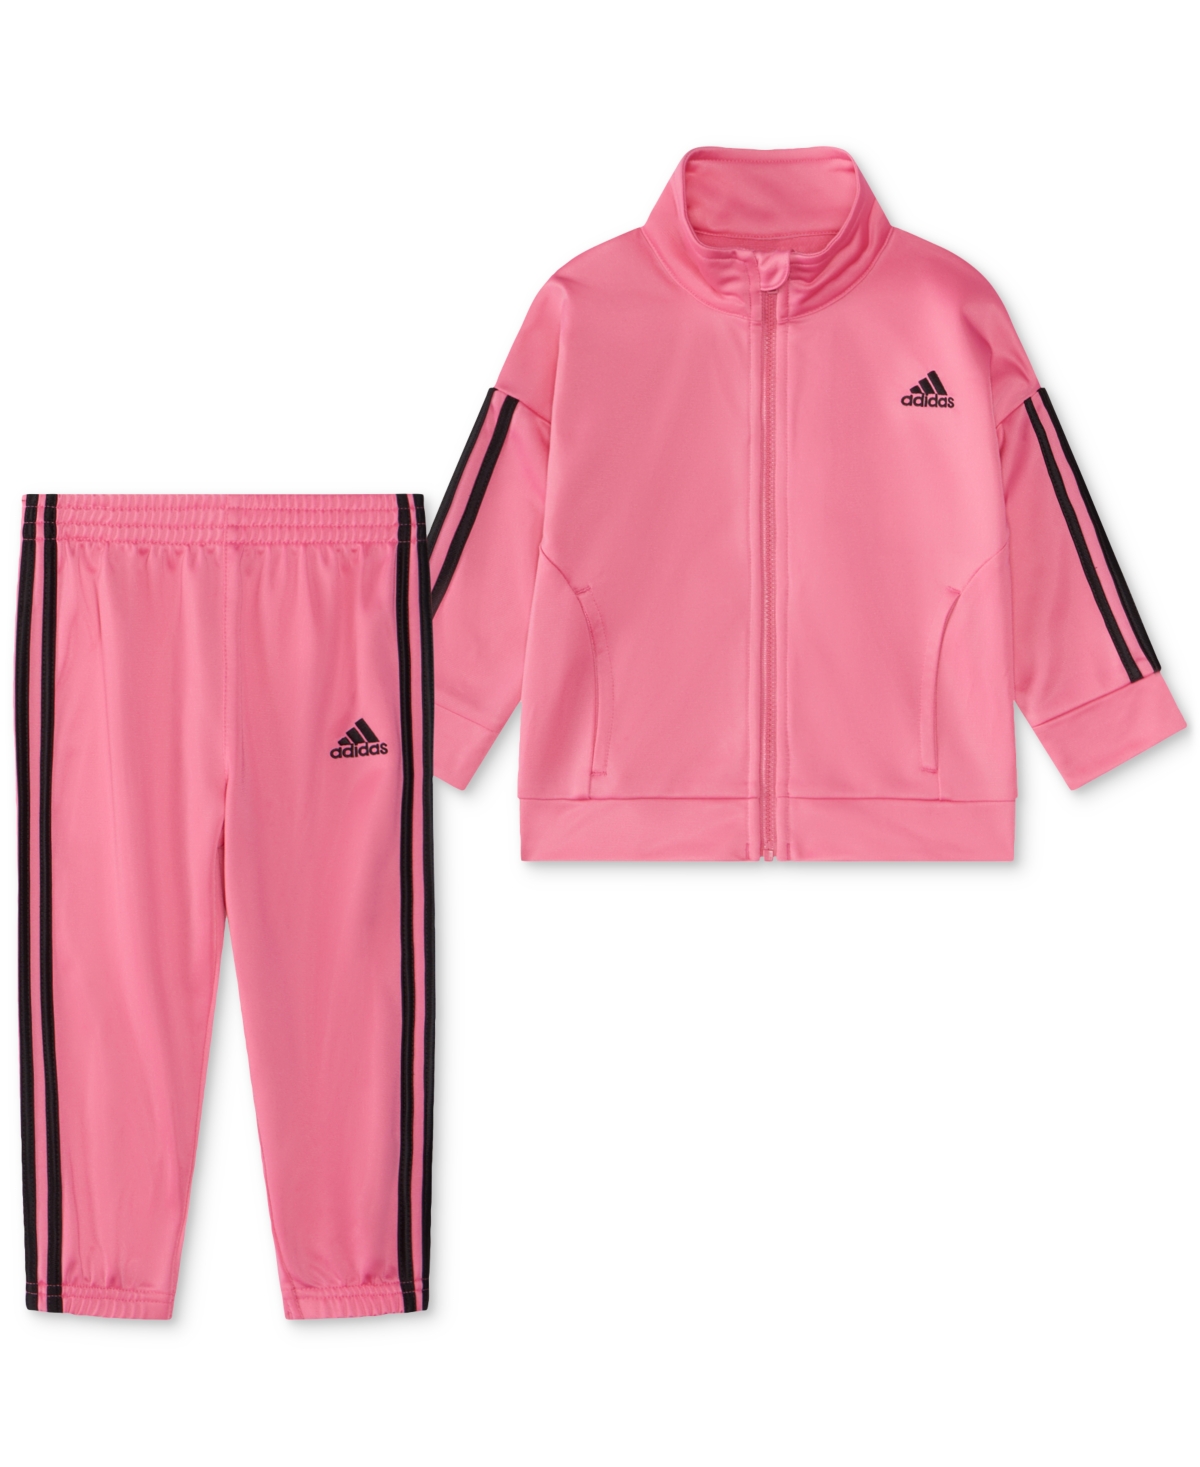 Adidas Originals Baby Girls Essential Tricot Jacket And Pants, 2 Piece Set In Pink Fusion